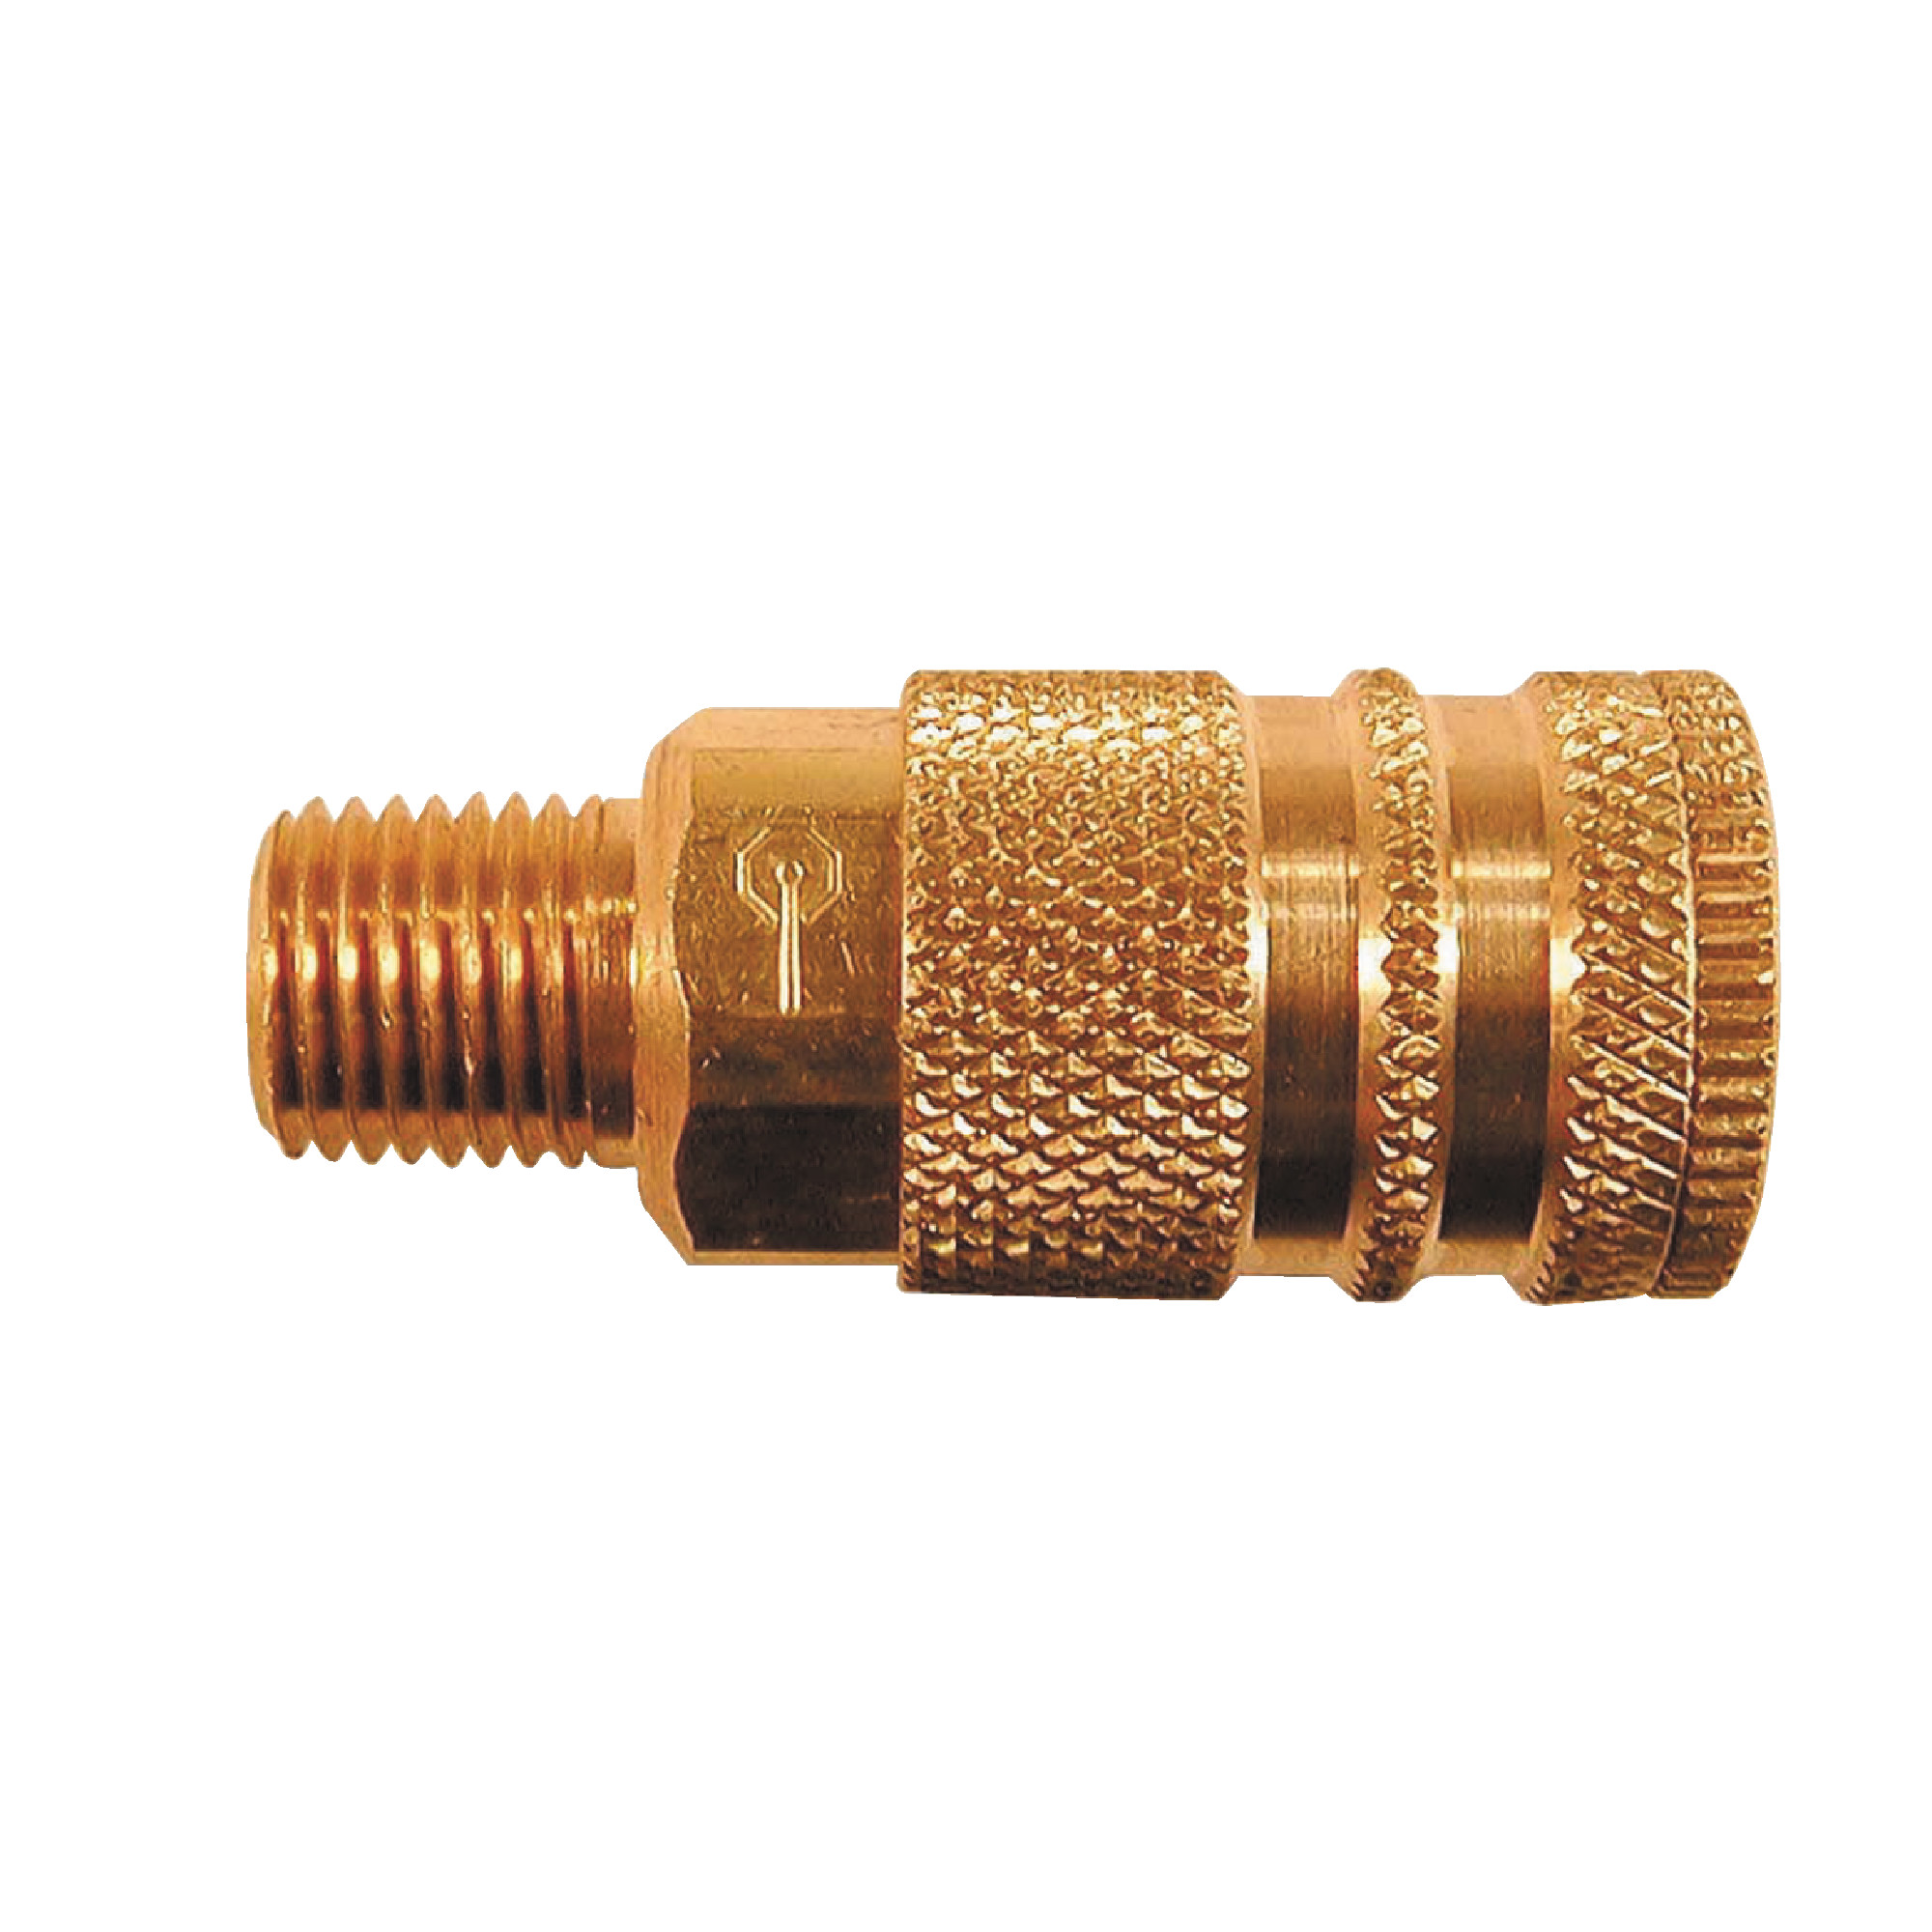 1/4" Industrial Coupler, 1/4" MPT